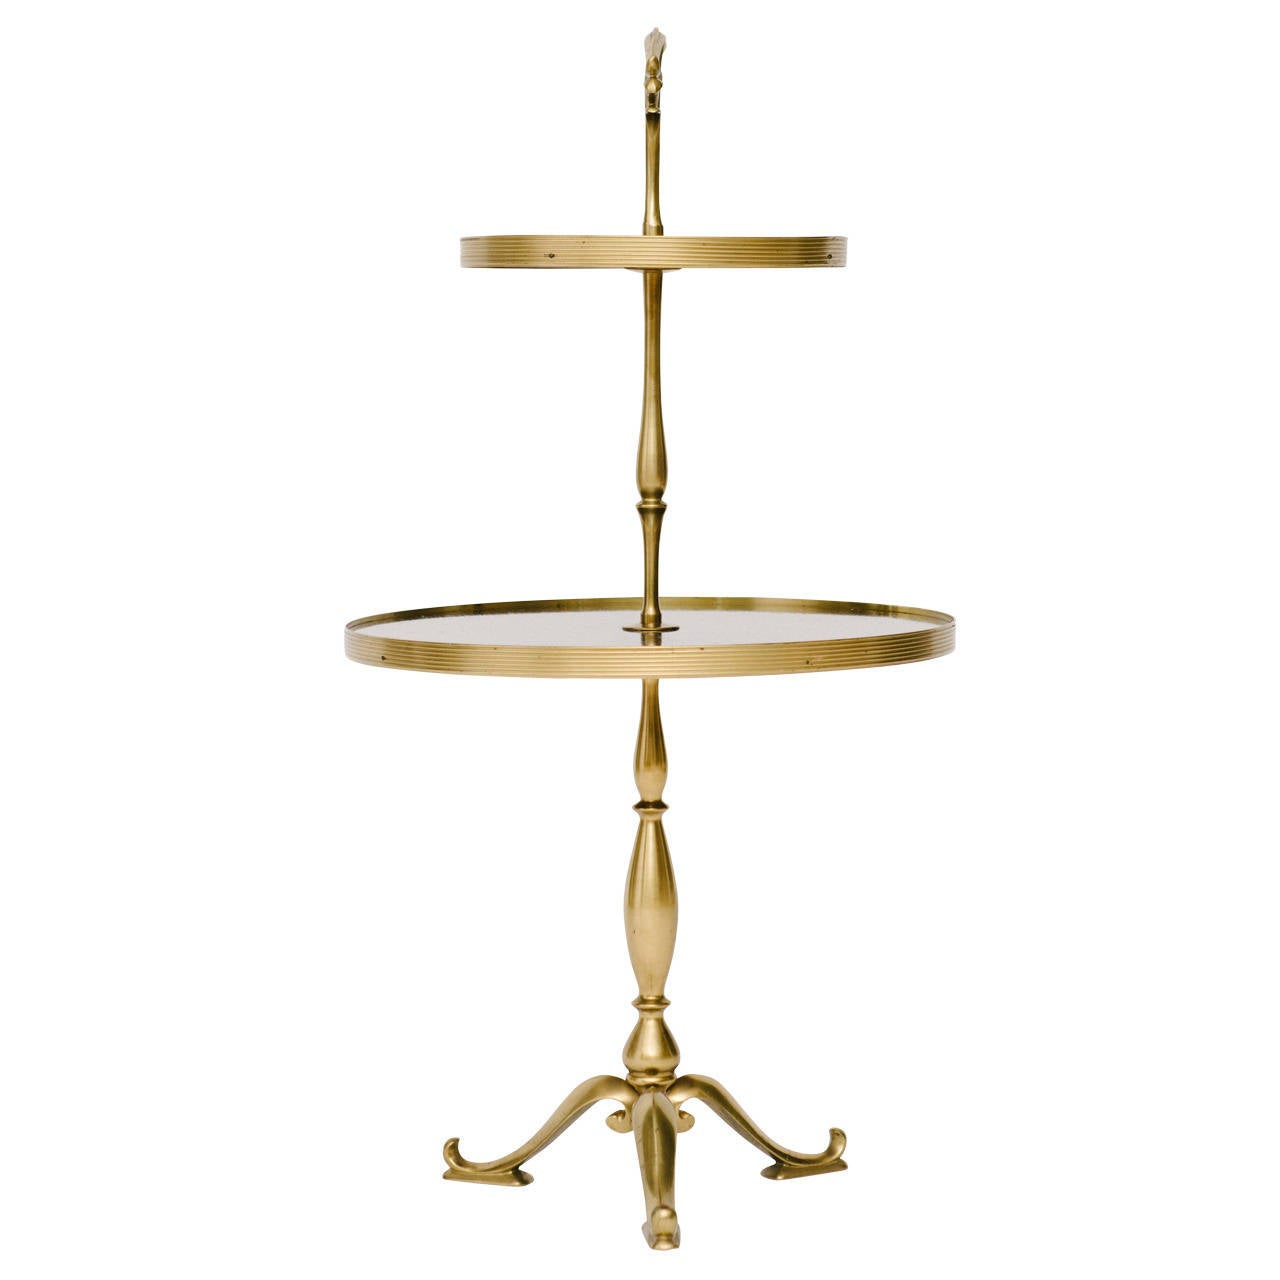 Chic Mid-Century Italian two-tiered brass and wood side table.